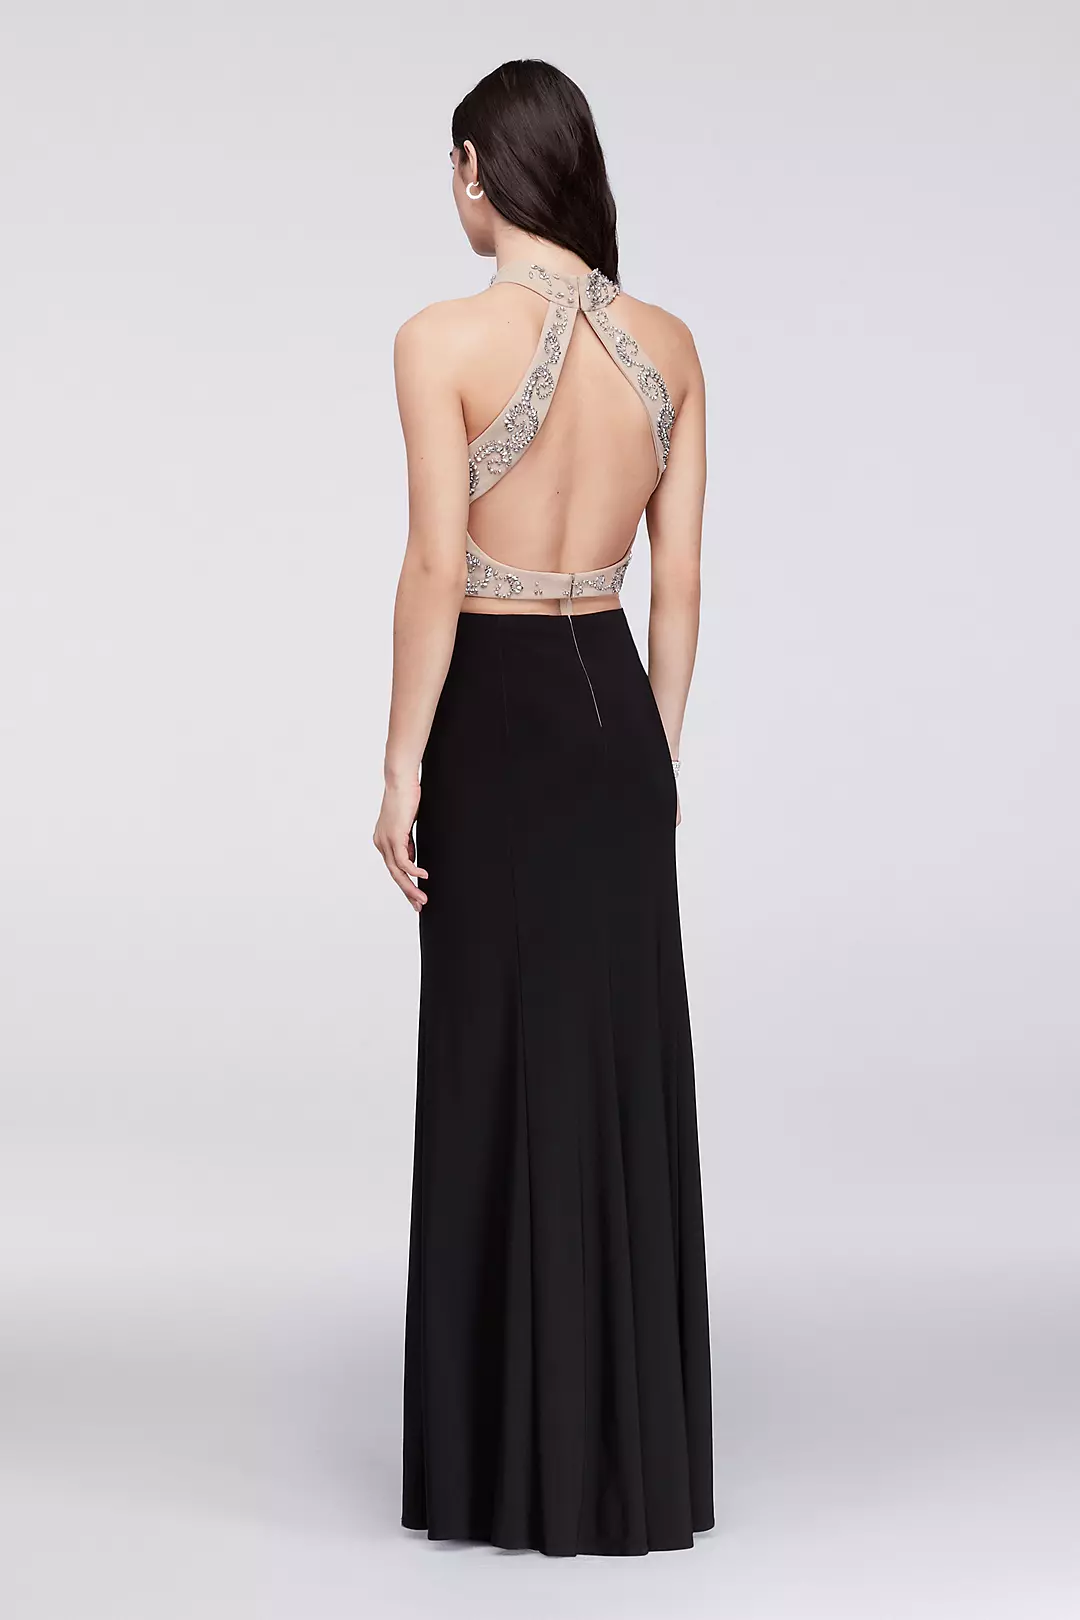 Caviar-Beaded Mesh and Jersey Faux Two-Piece Dress Image 2